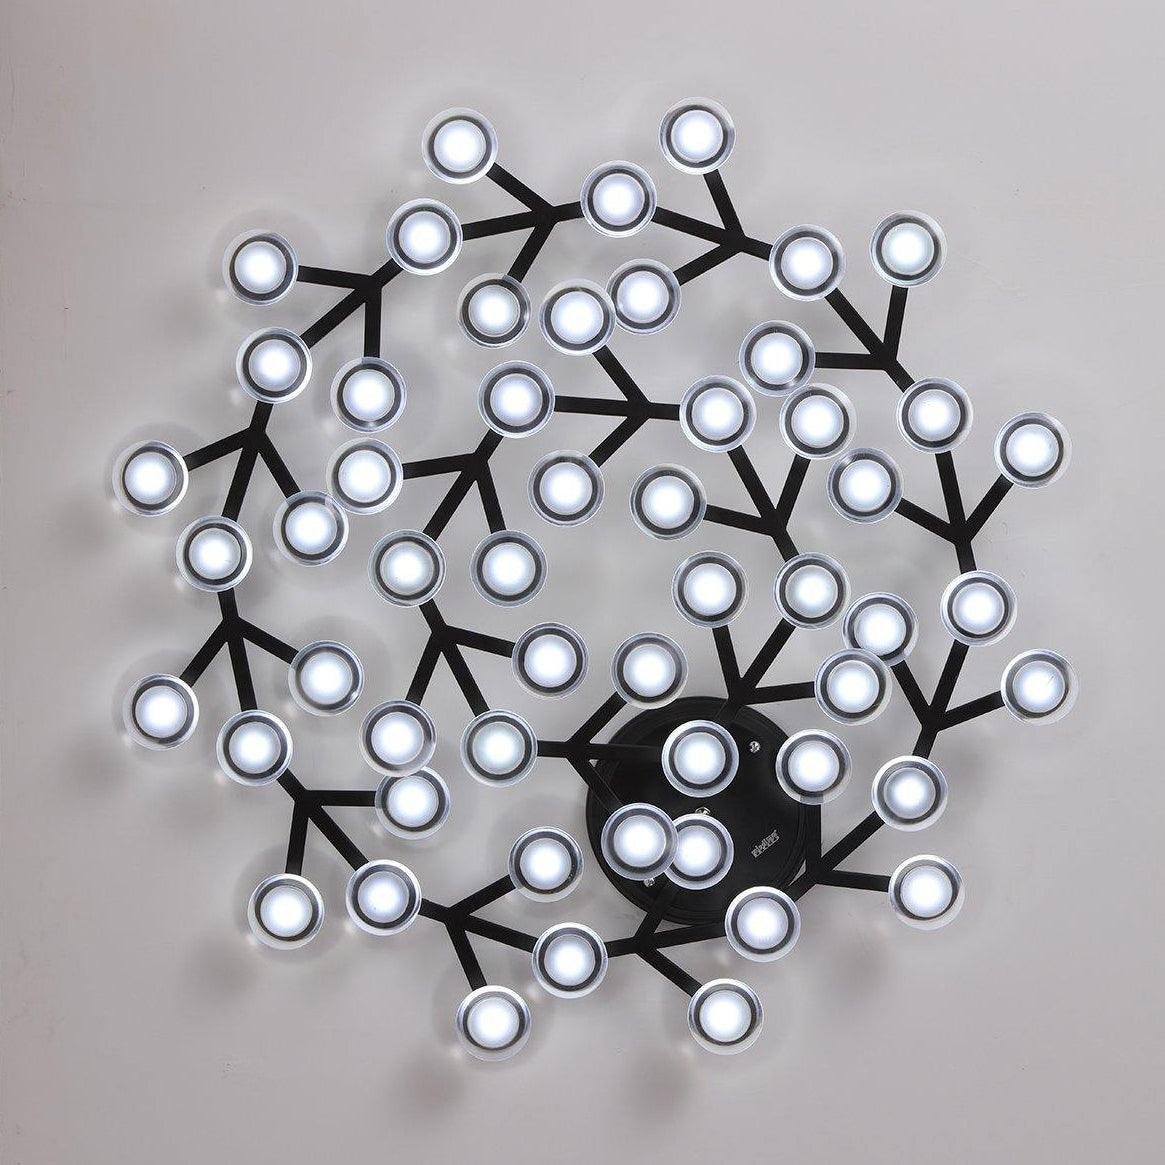 Black LED Net Ceiling Wall Lamp with 54 Round Heads in Warm White.